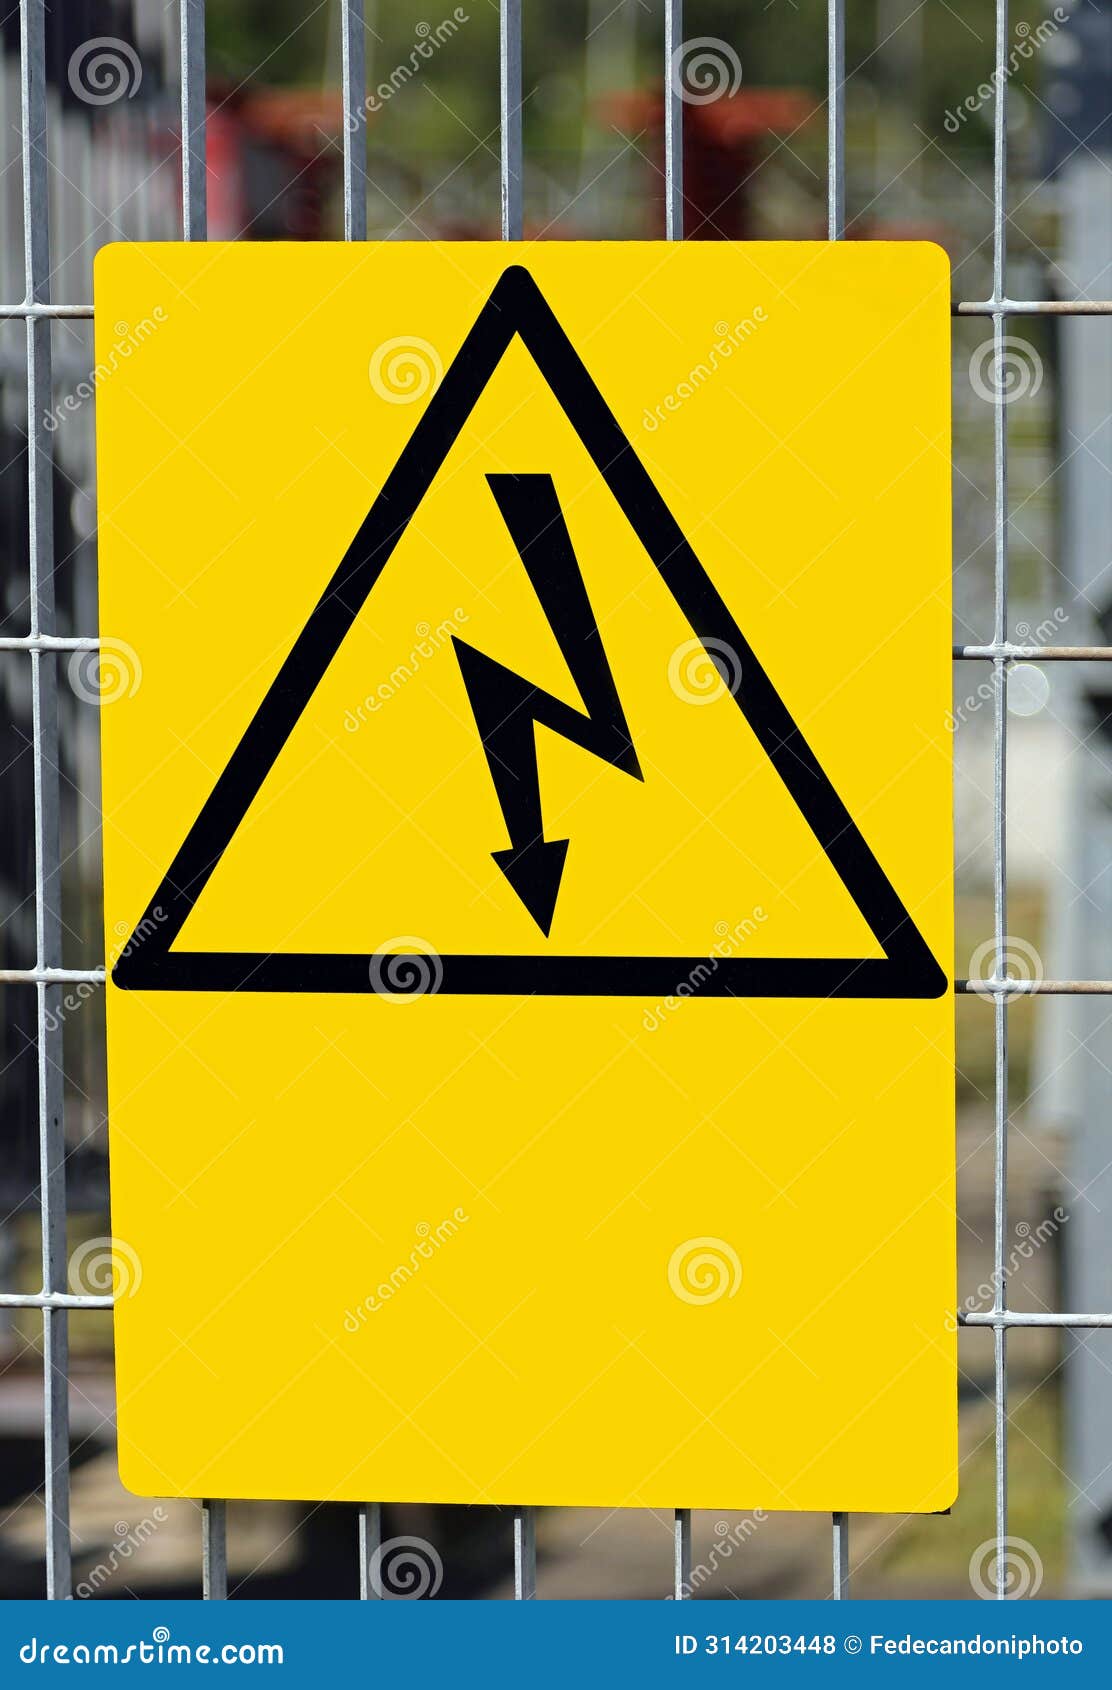 danger high voltage risk of death sign  with lightning bolt in yellow triangle